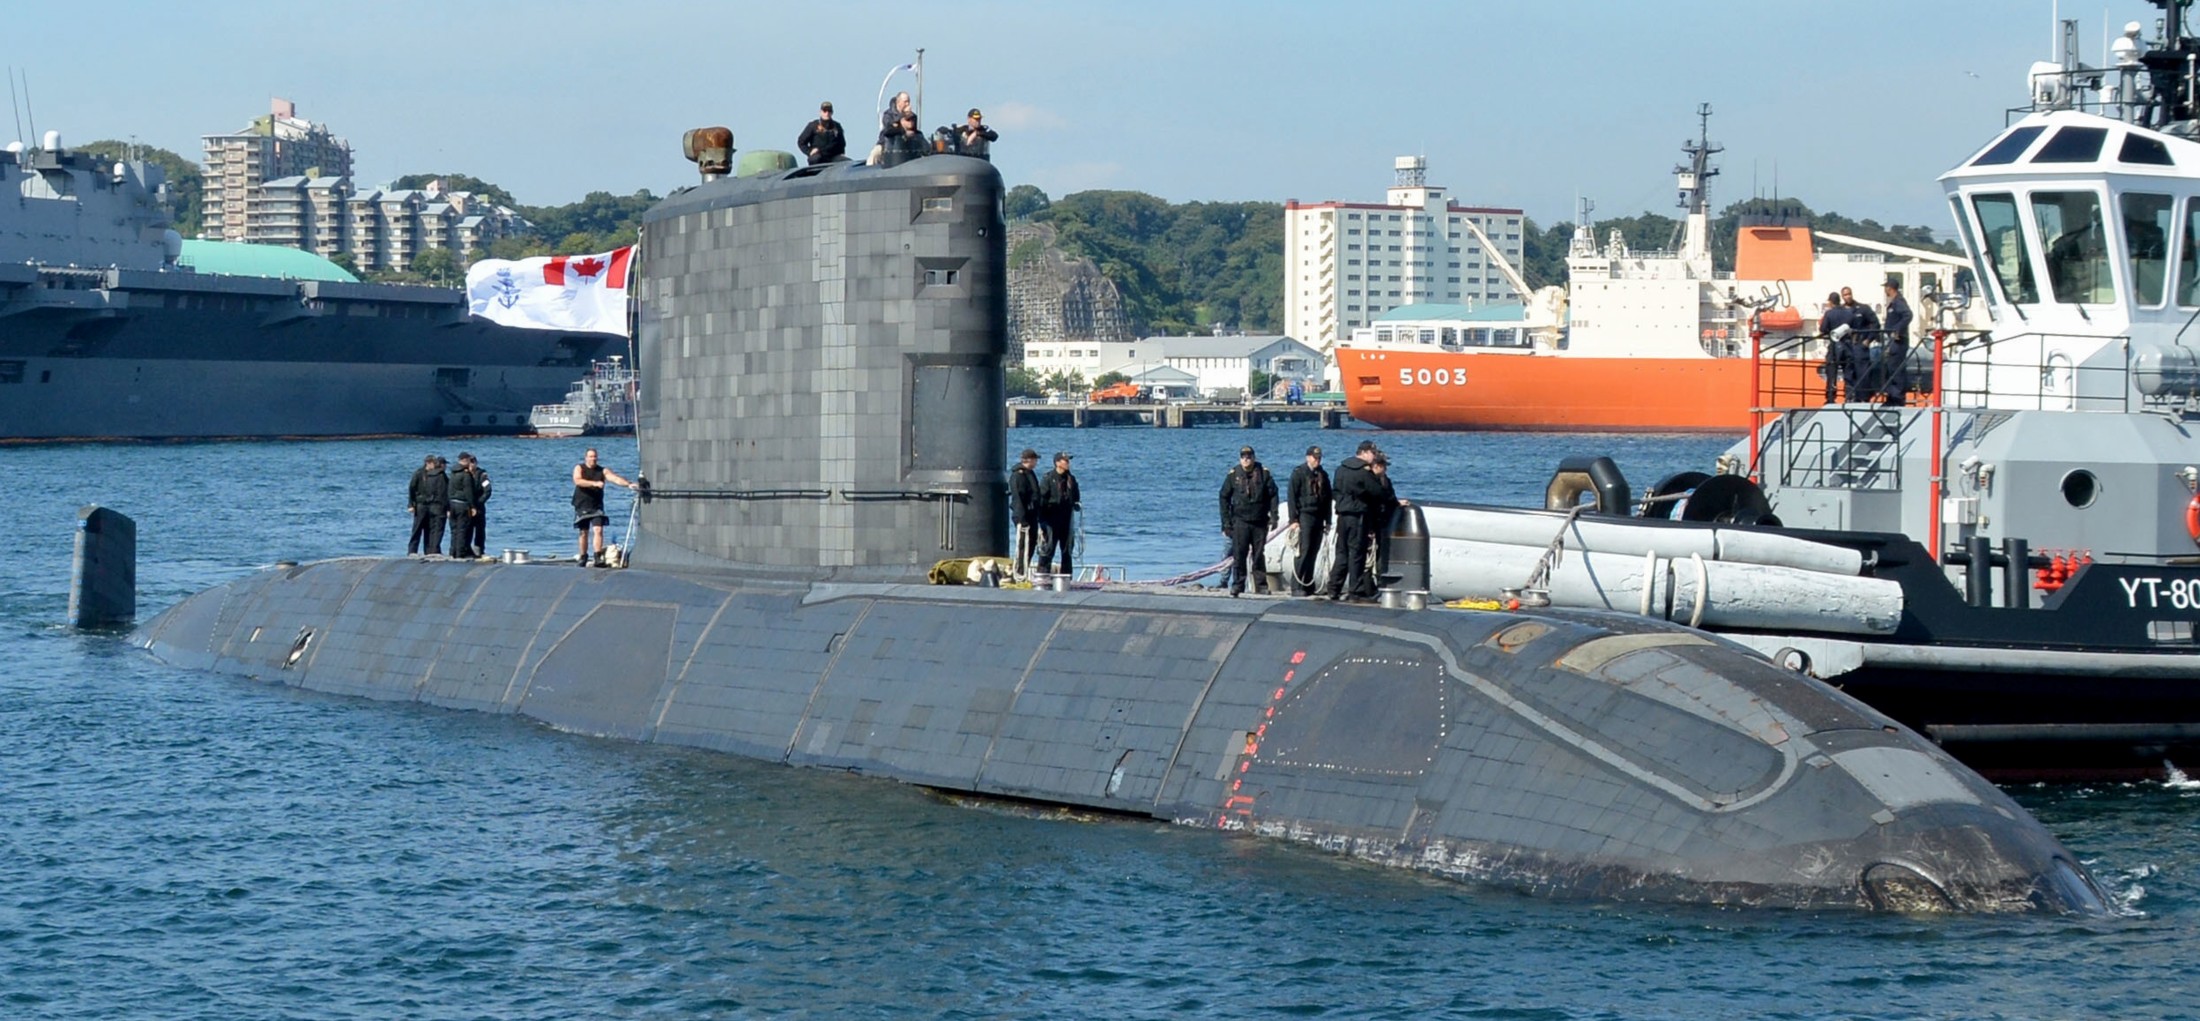 ssk-879 hmcs chicoutimi victoria upholder class patrol submarine ncsm royal canadian navy 06